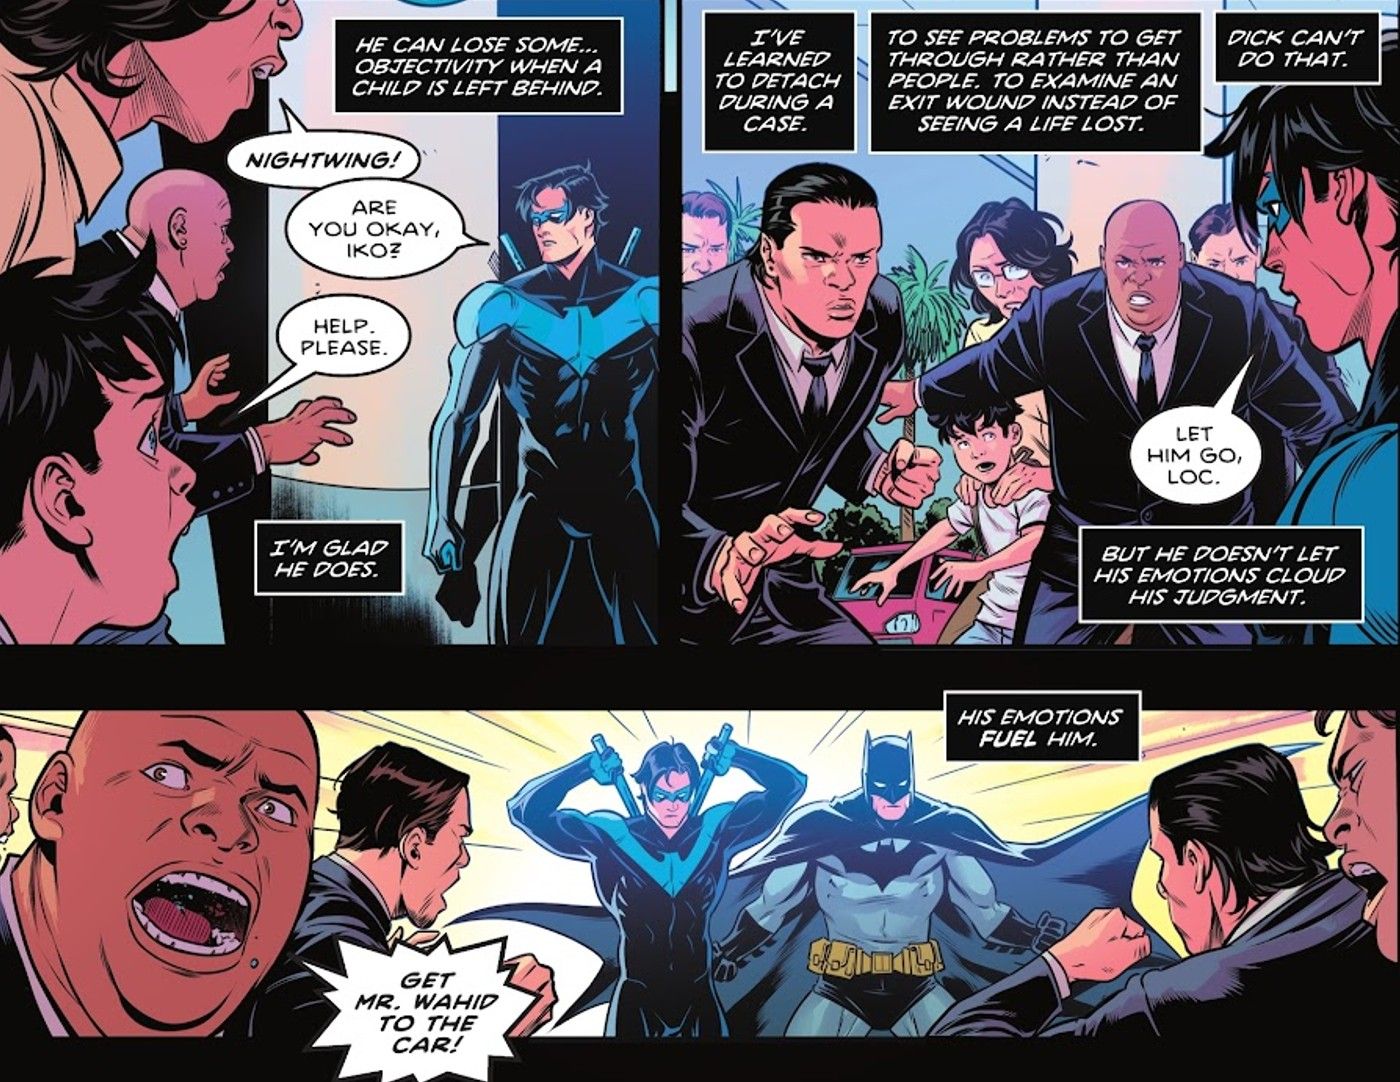 Nightwing Confirms His Biggest Difference to Batman, & Why They’ll Never Be the Same